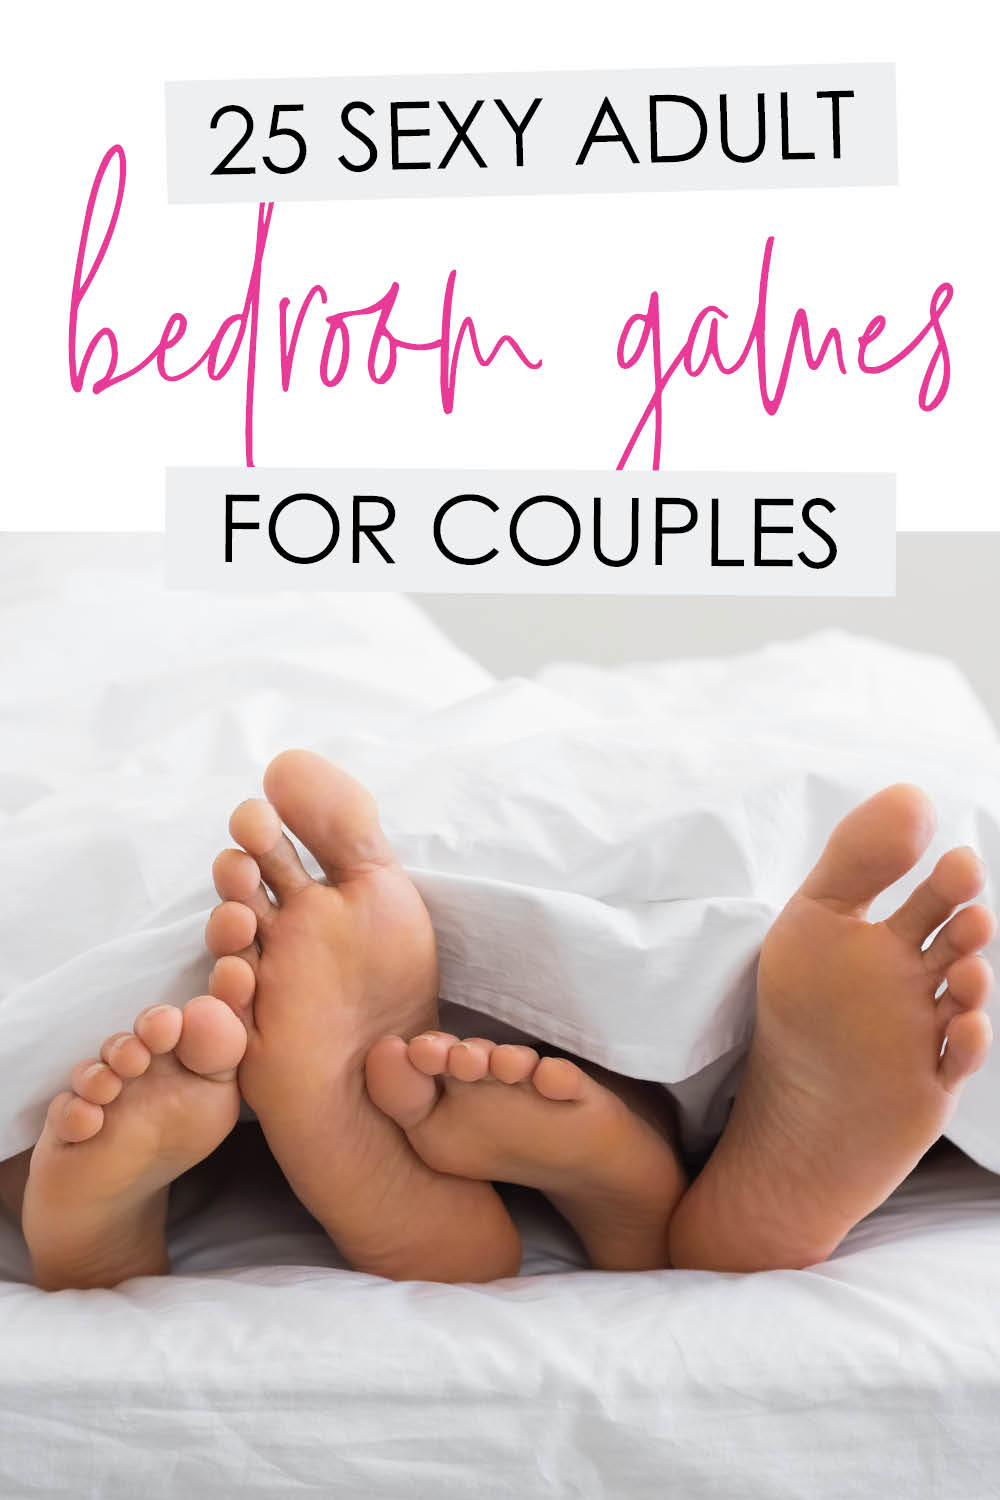 The best list of sexy bedroom games for couples | The Dating Divas 